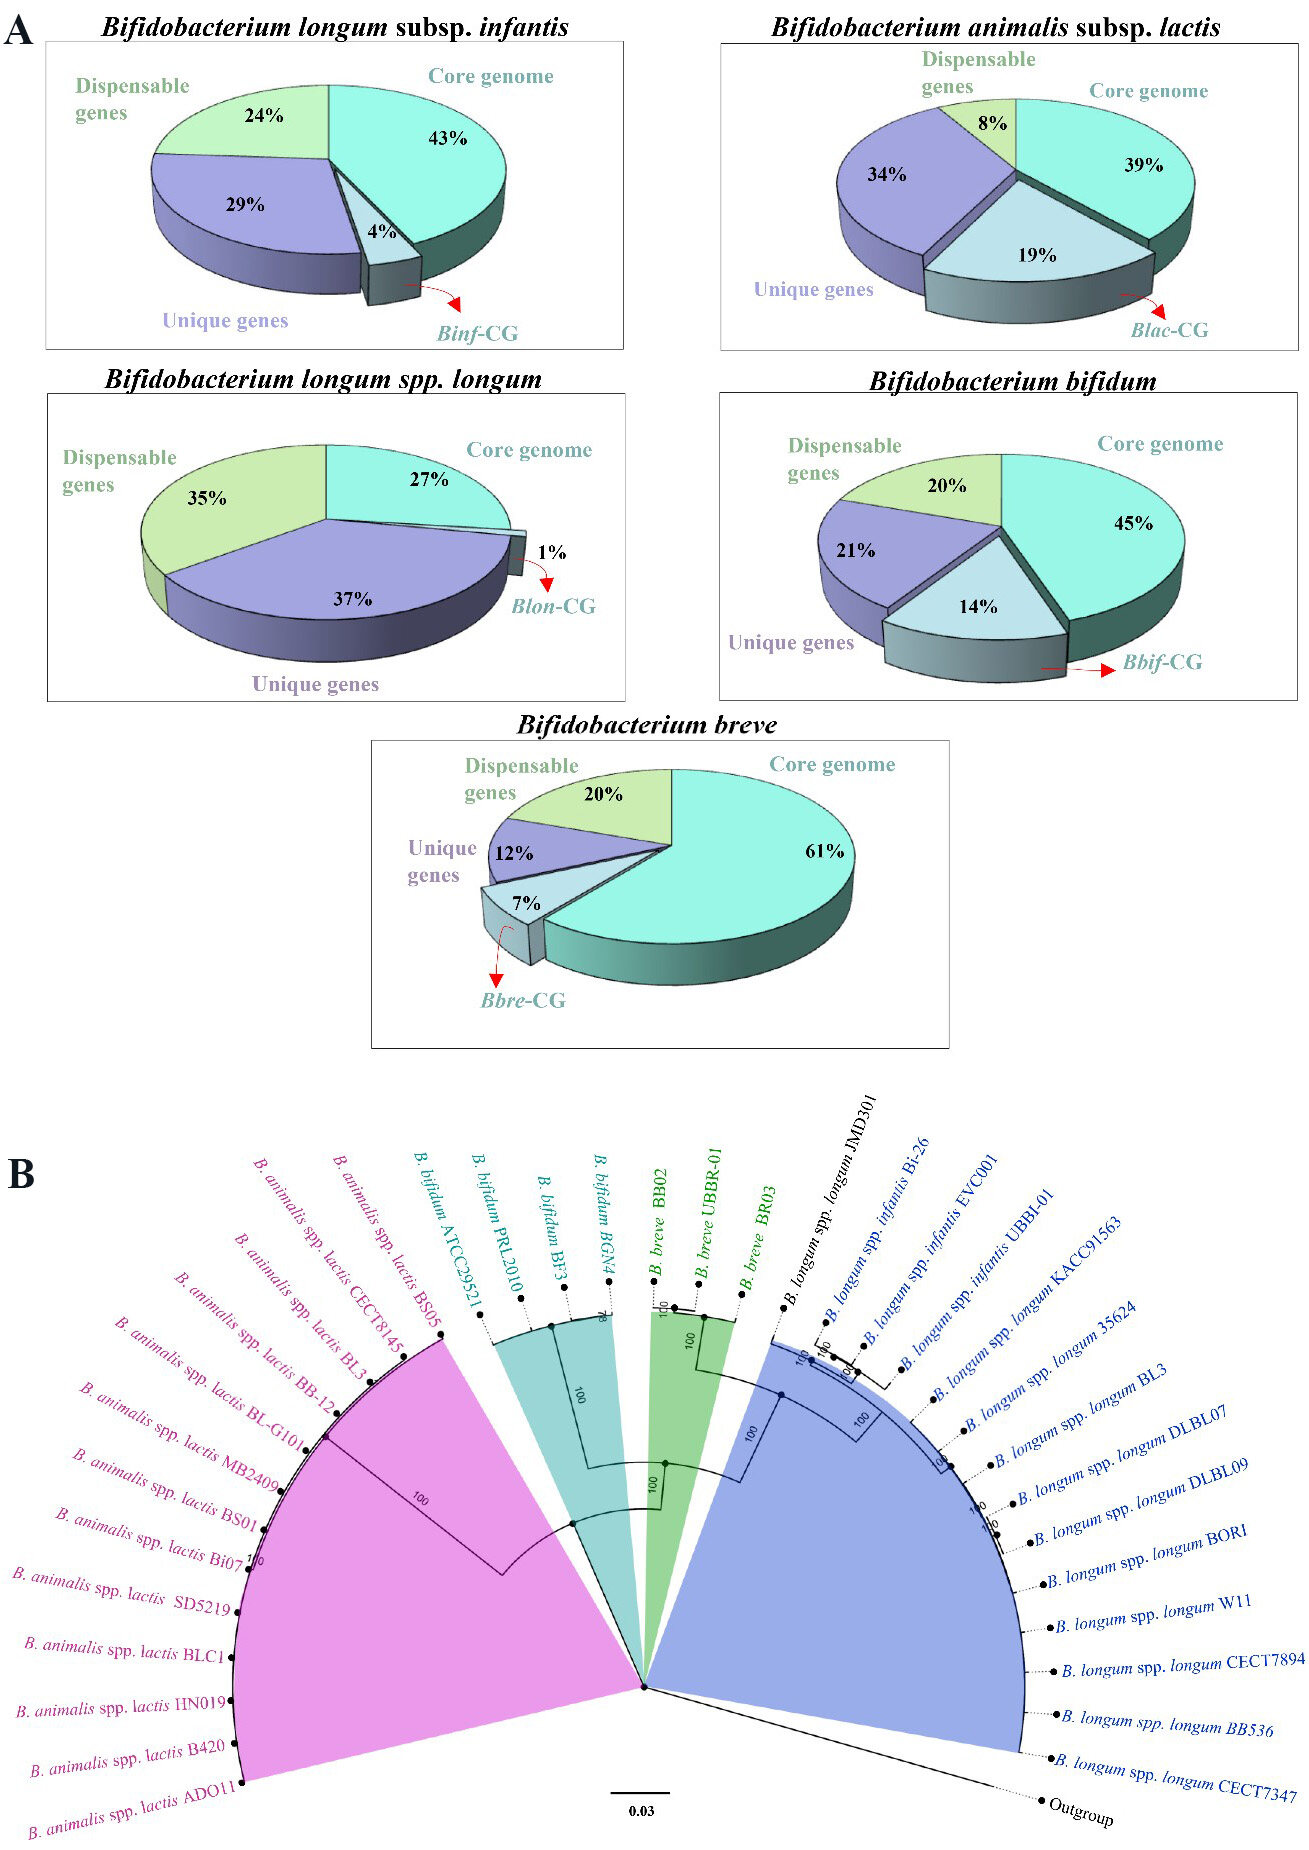 The Integrated Probiotic Database: a genomic compendium of bifidobacterial health-promoting strains